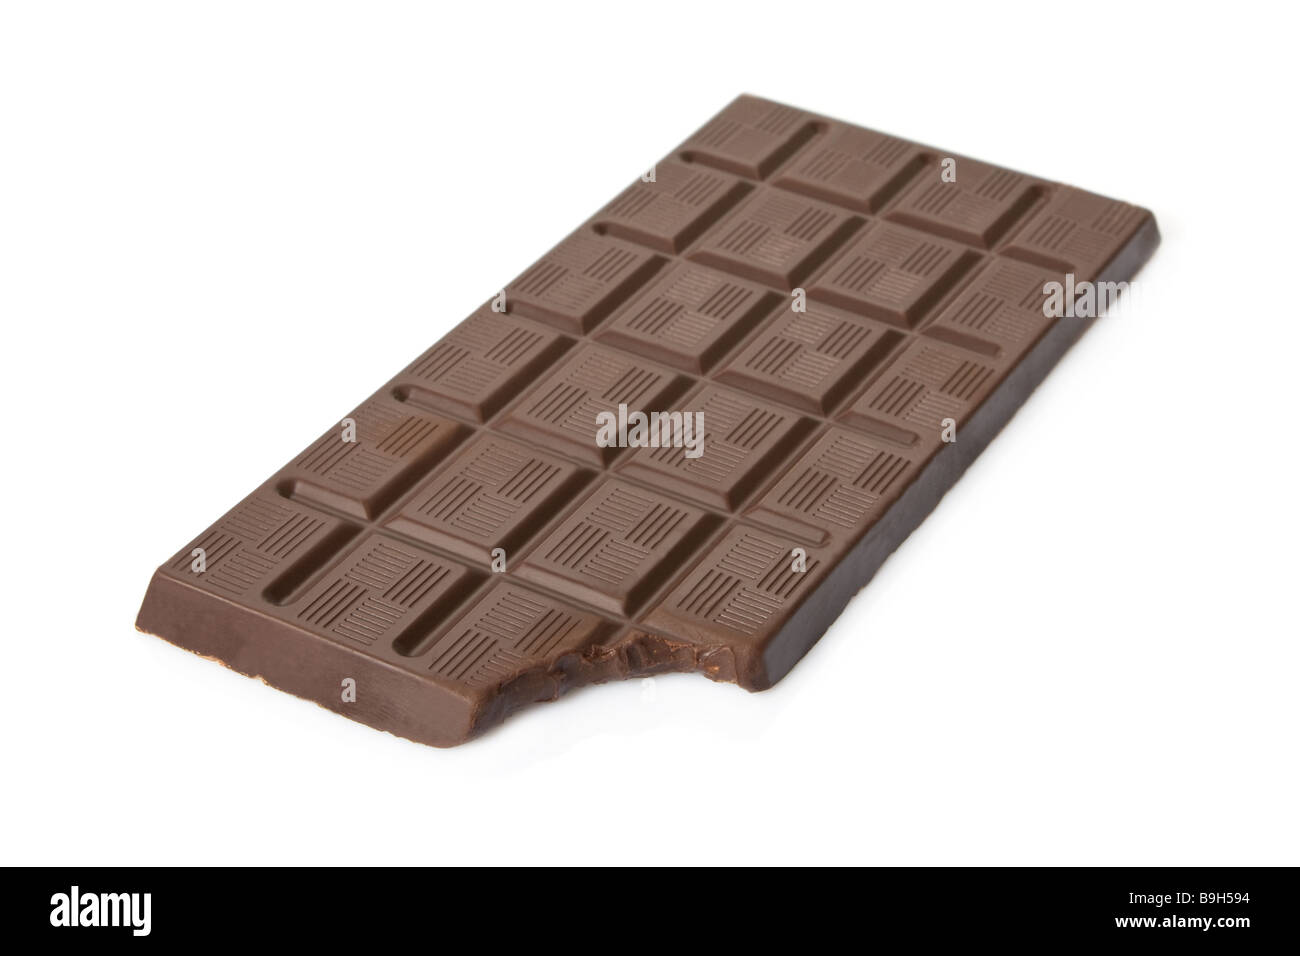 Bitten dark chocolate bar isolated on white background. eaten cut out milk cutout nibble sweet sweets brown candy dessert block food snack ingredient Stock Photo